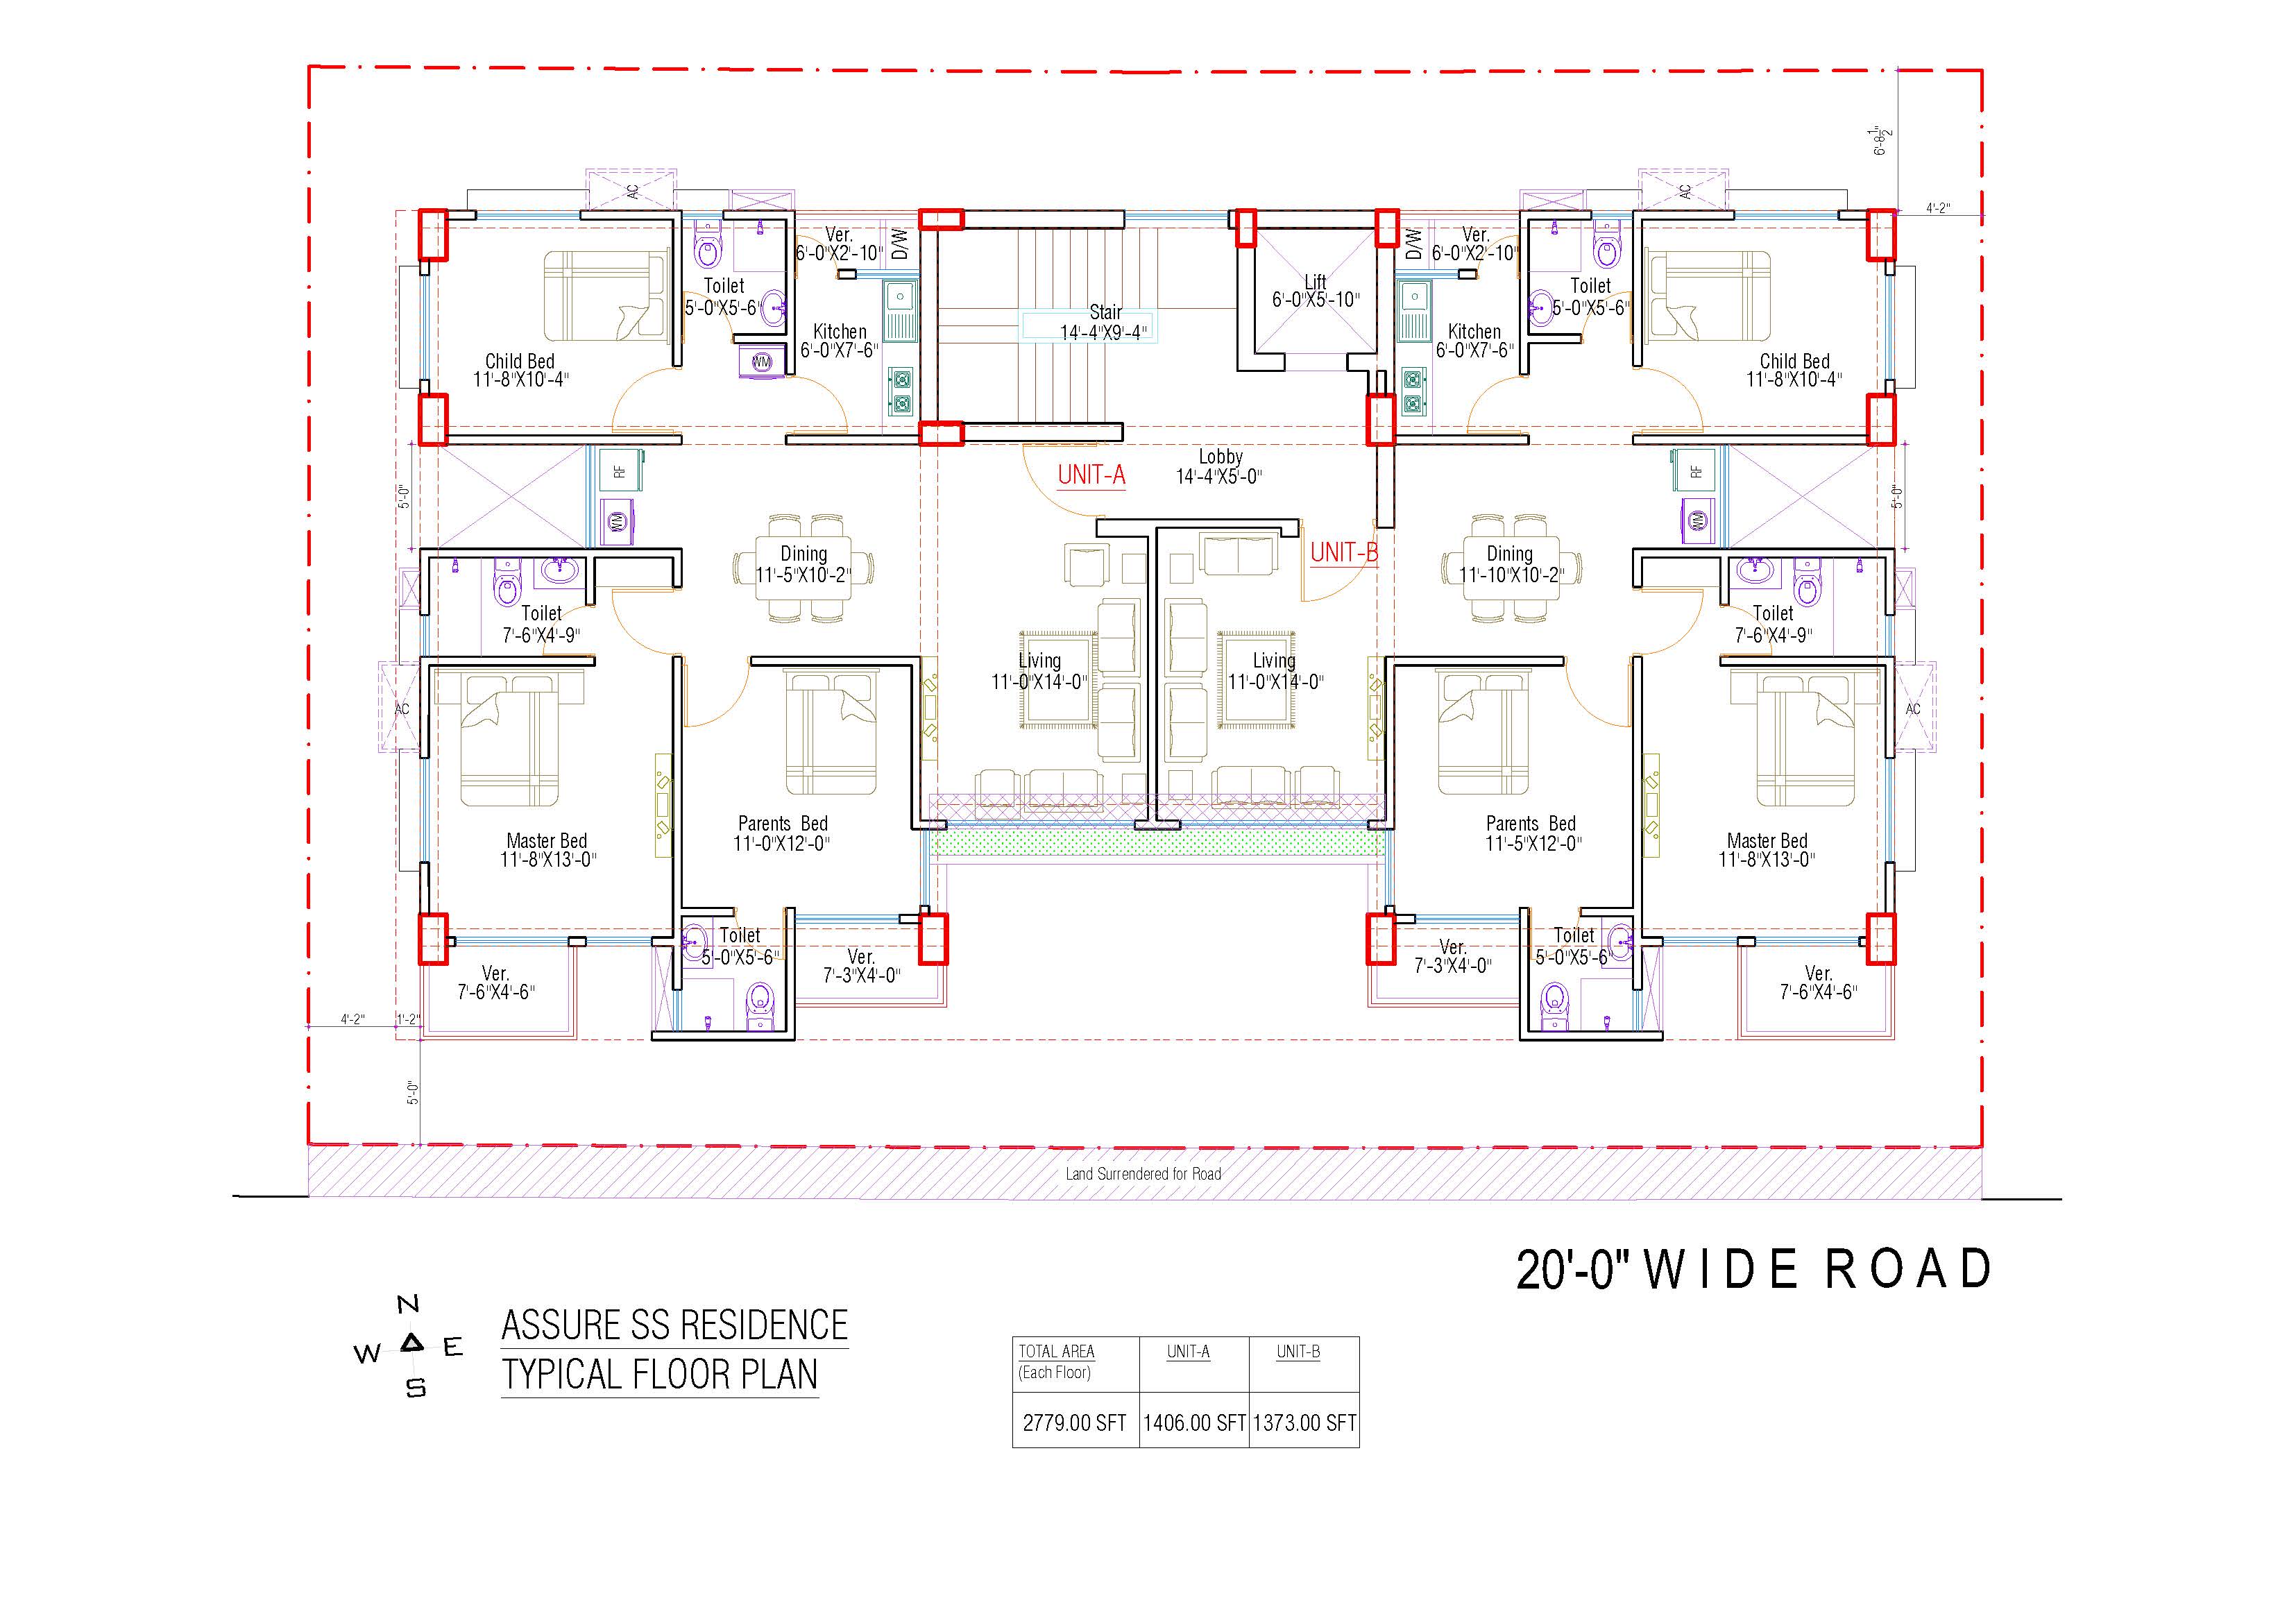 Assure SS Residence Typical Floor Plan